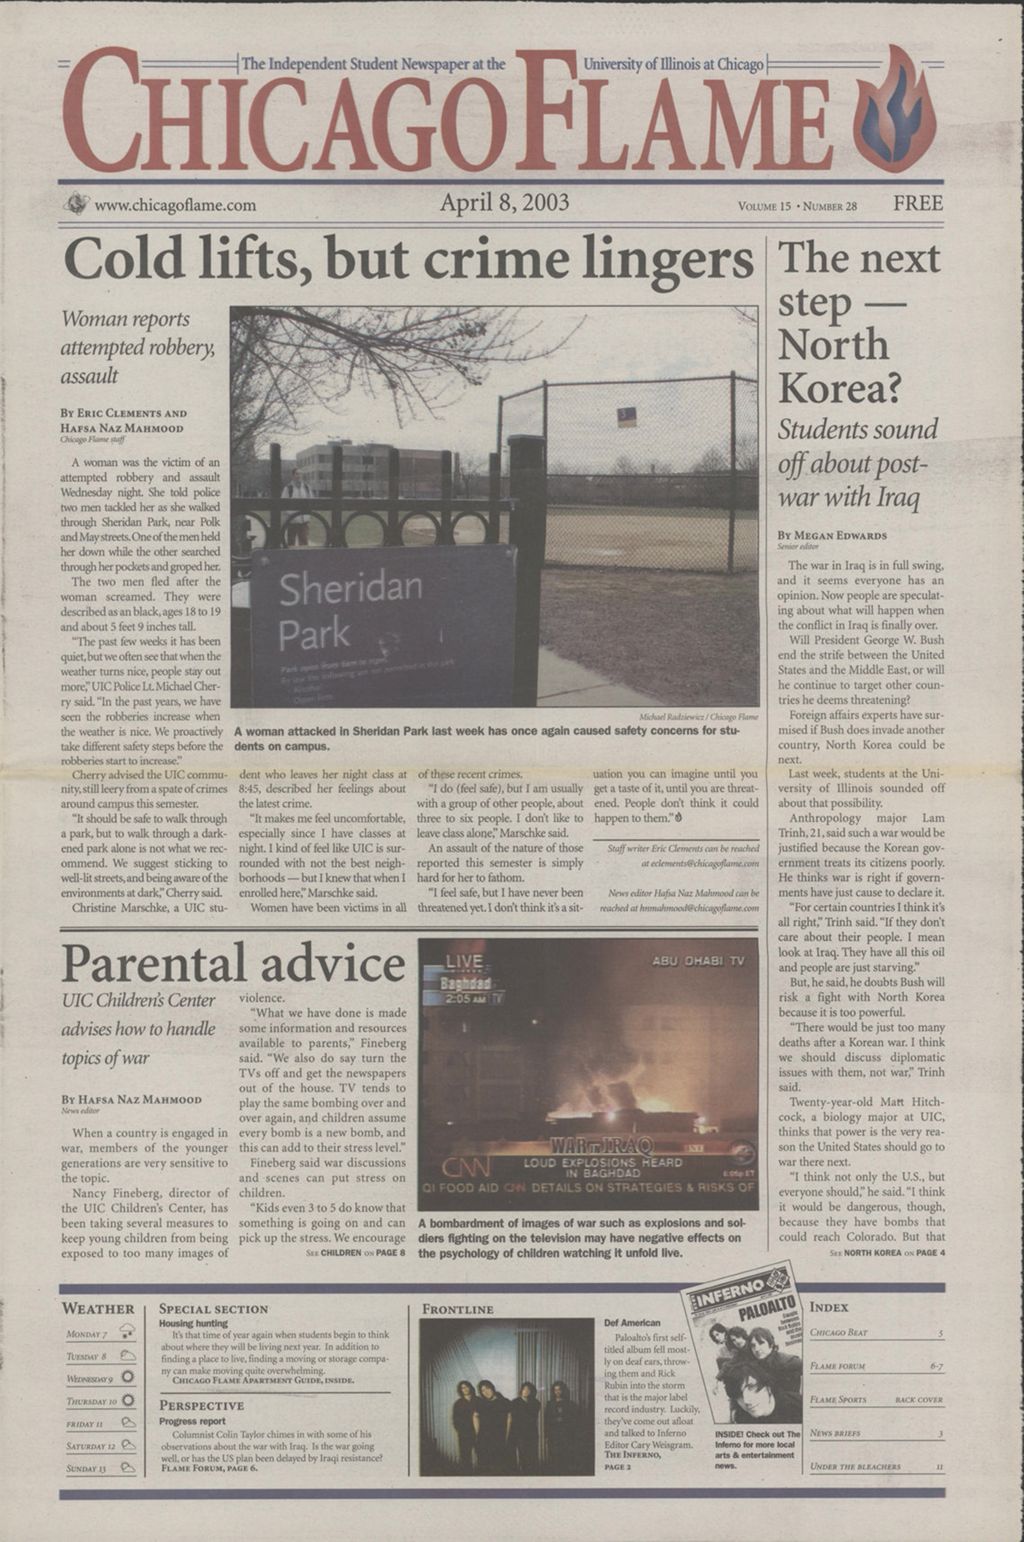 Chicago Flame (April 8, 2003)